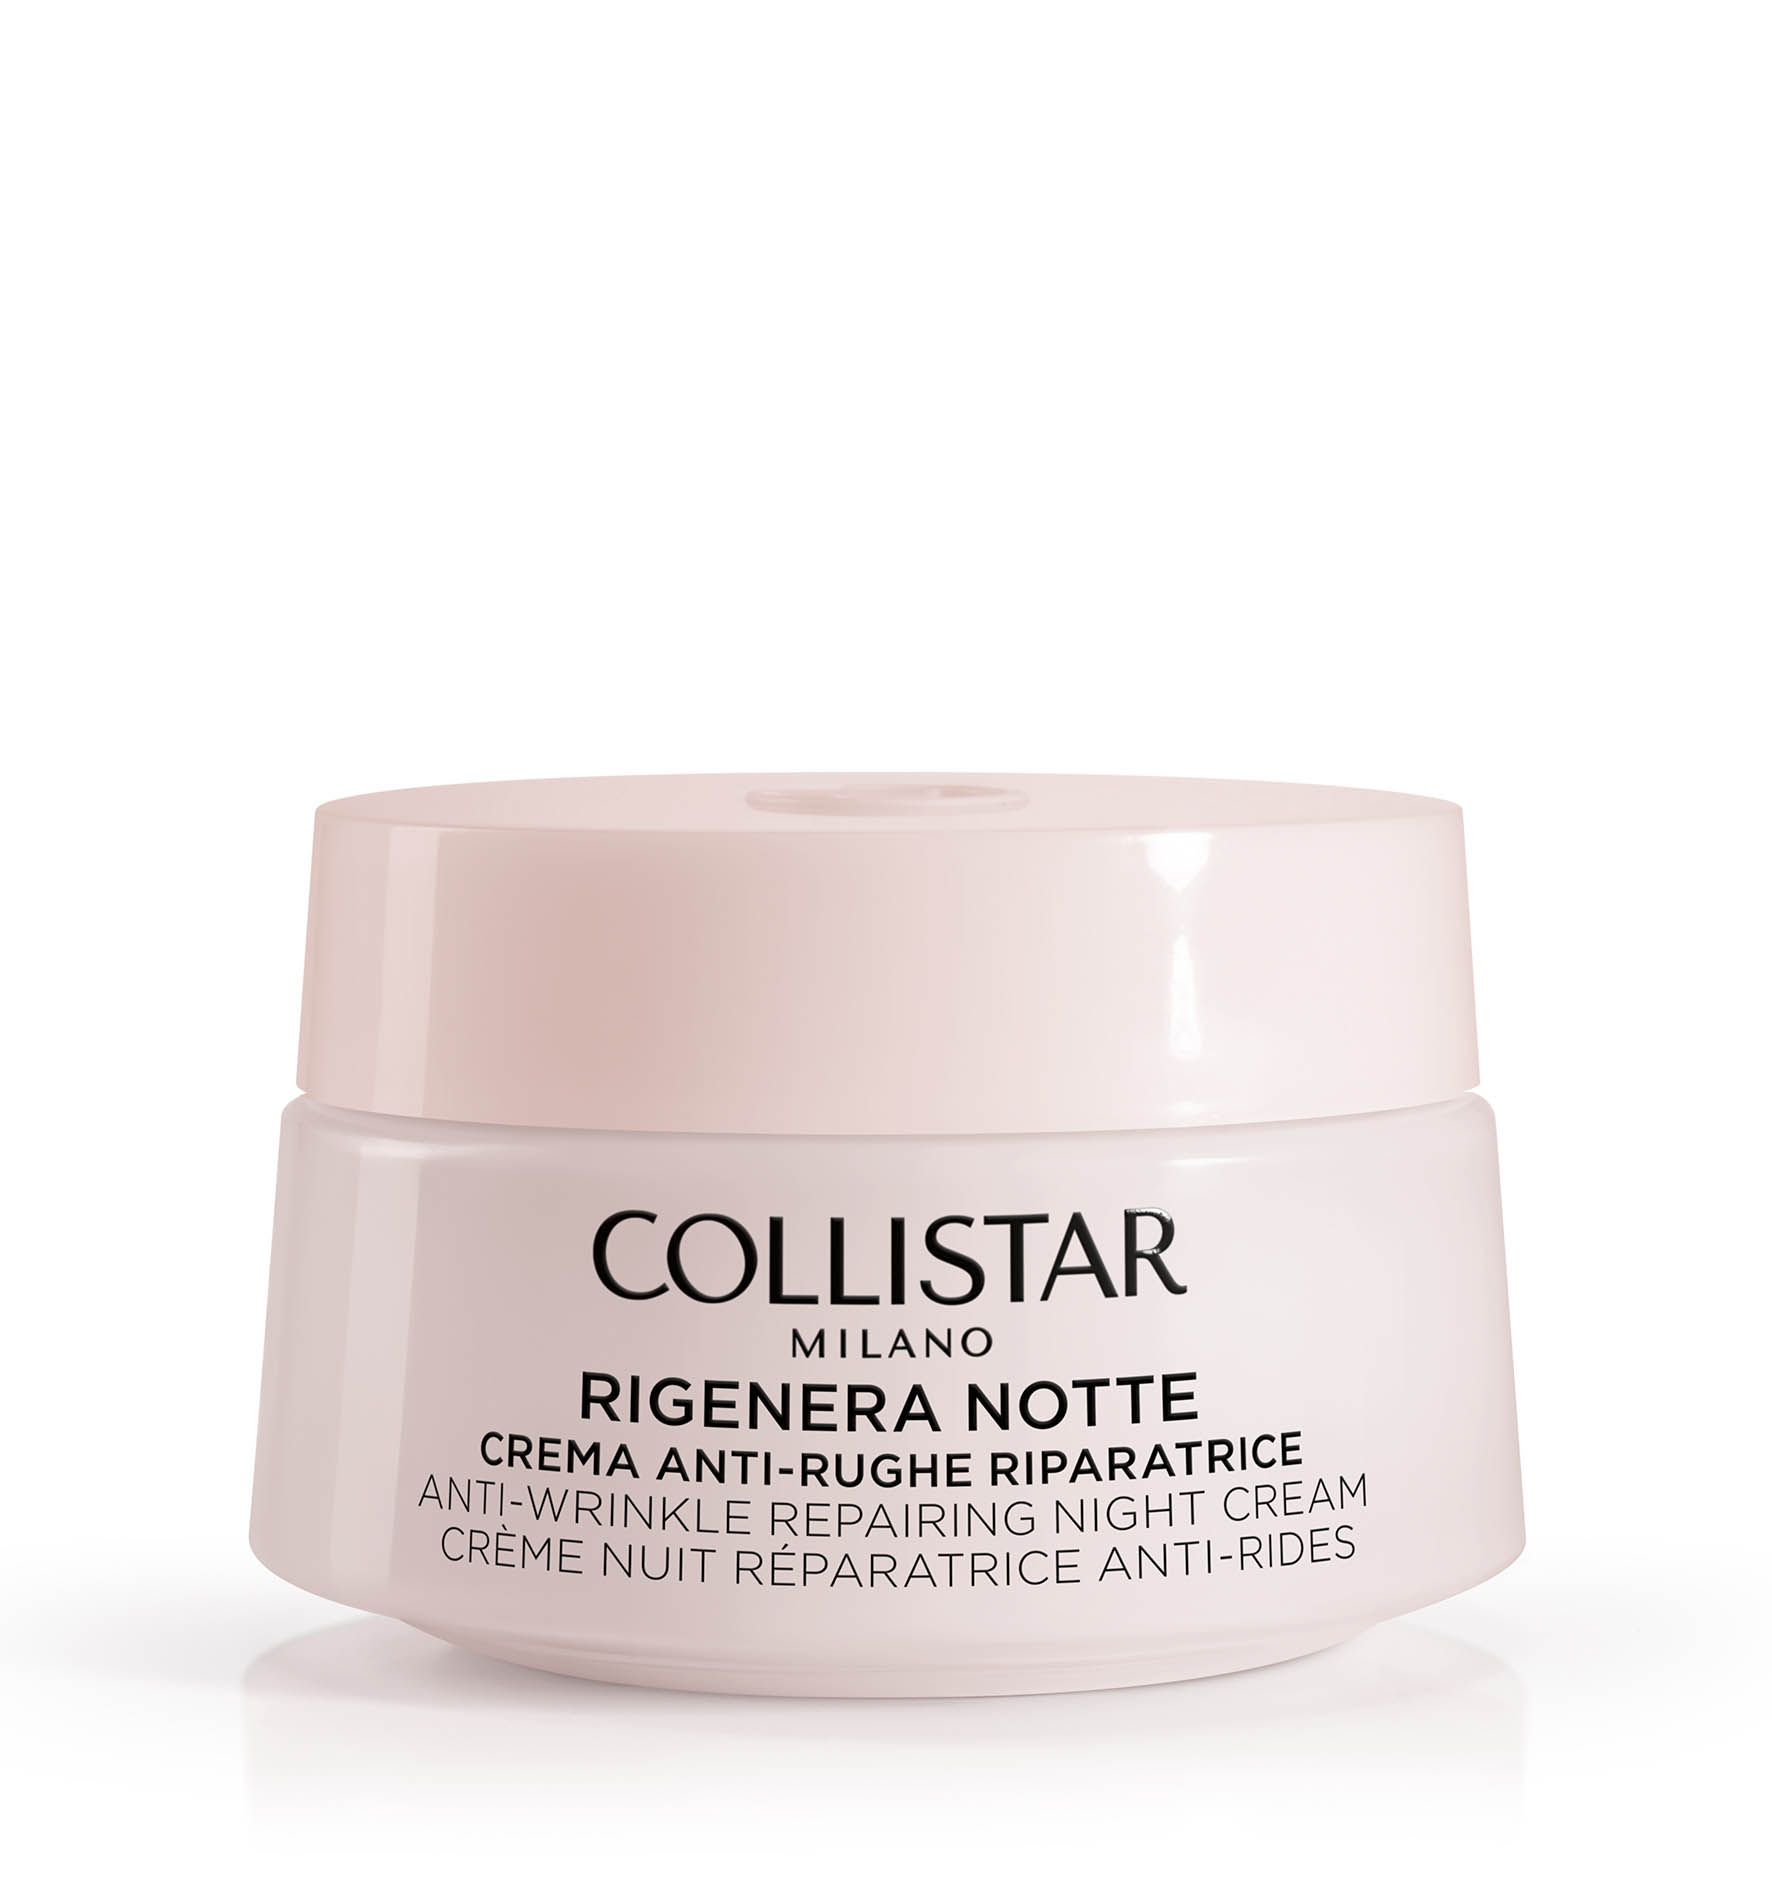 RIGENERA ANTI-WRINKLE REPAIRING FACE AND NECK NIGHT CREAM - NEW | Collistar - Shop Online Ufficiale